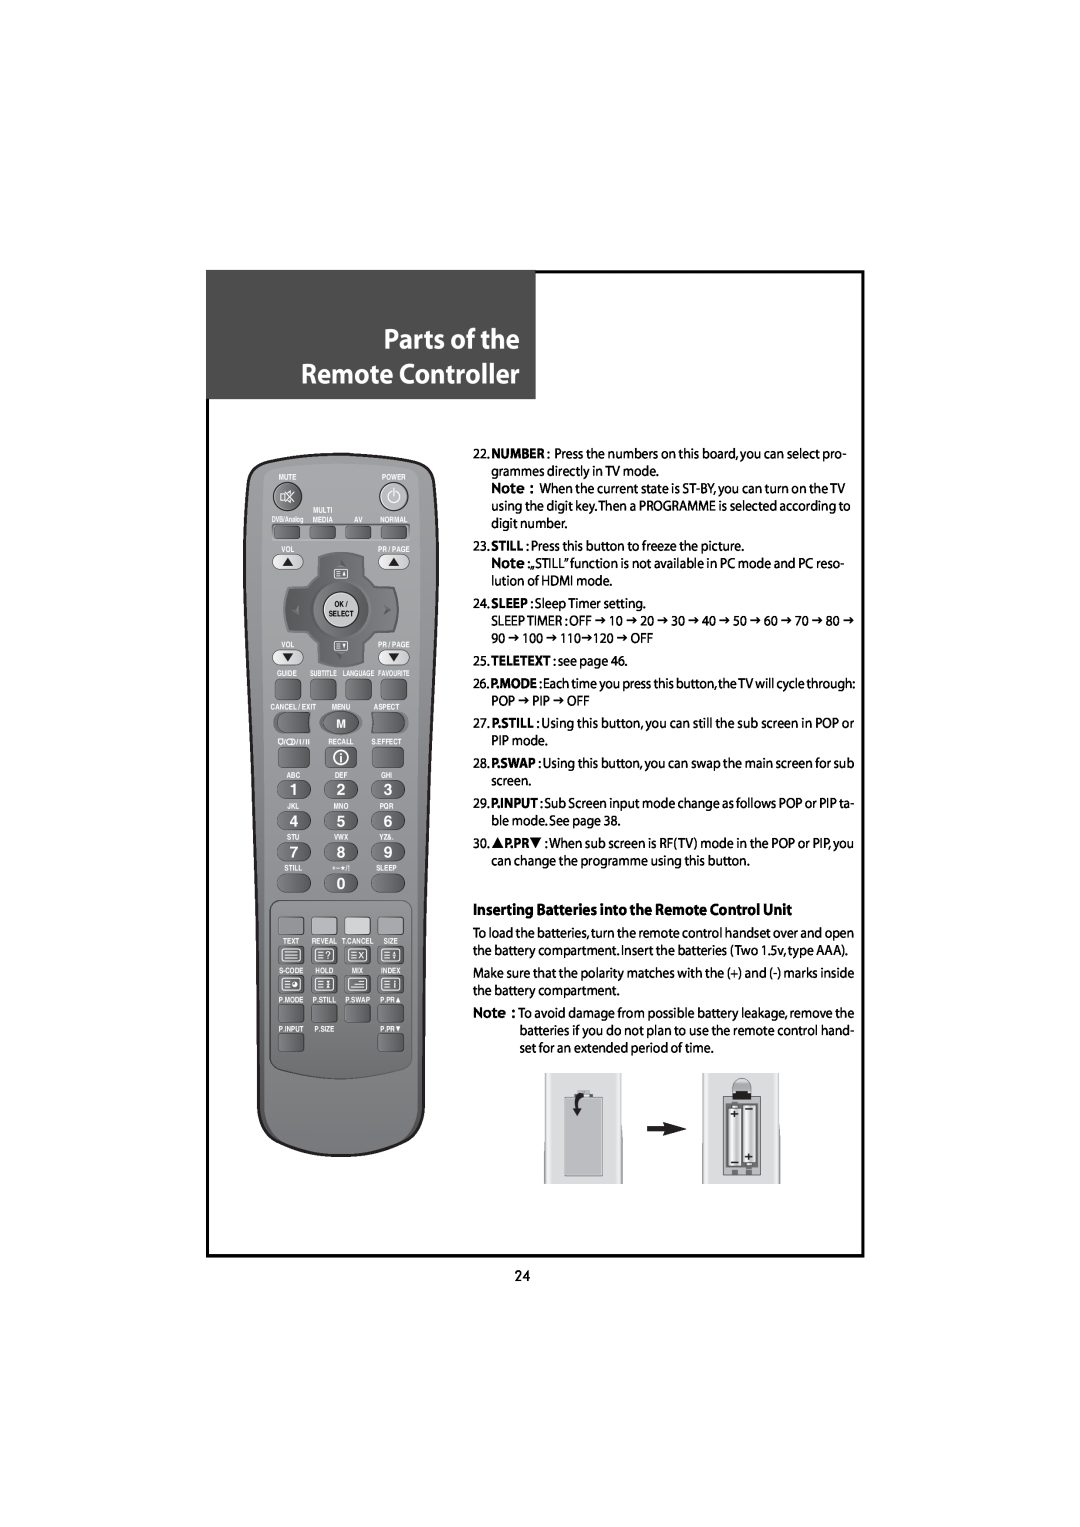 Daewoo DLT-42U1/G1FH, DLT-46U1FH Parts of the Remote Controller, Inserting Batteries into the Remote Control Unit 